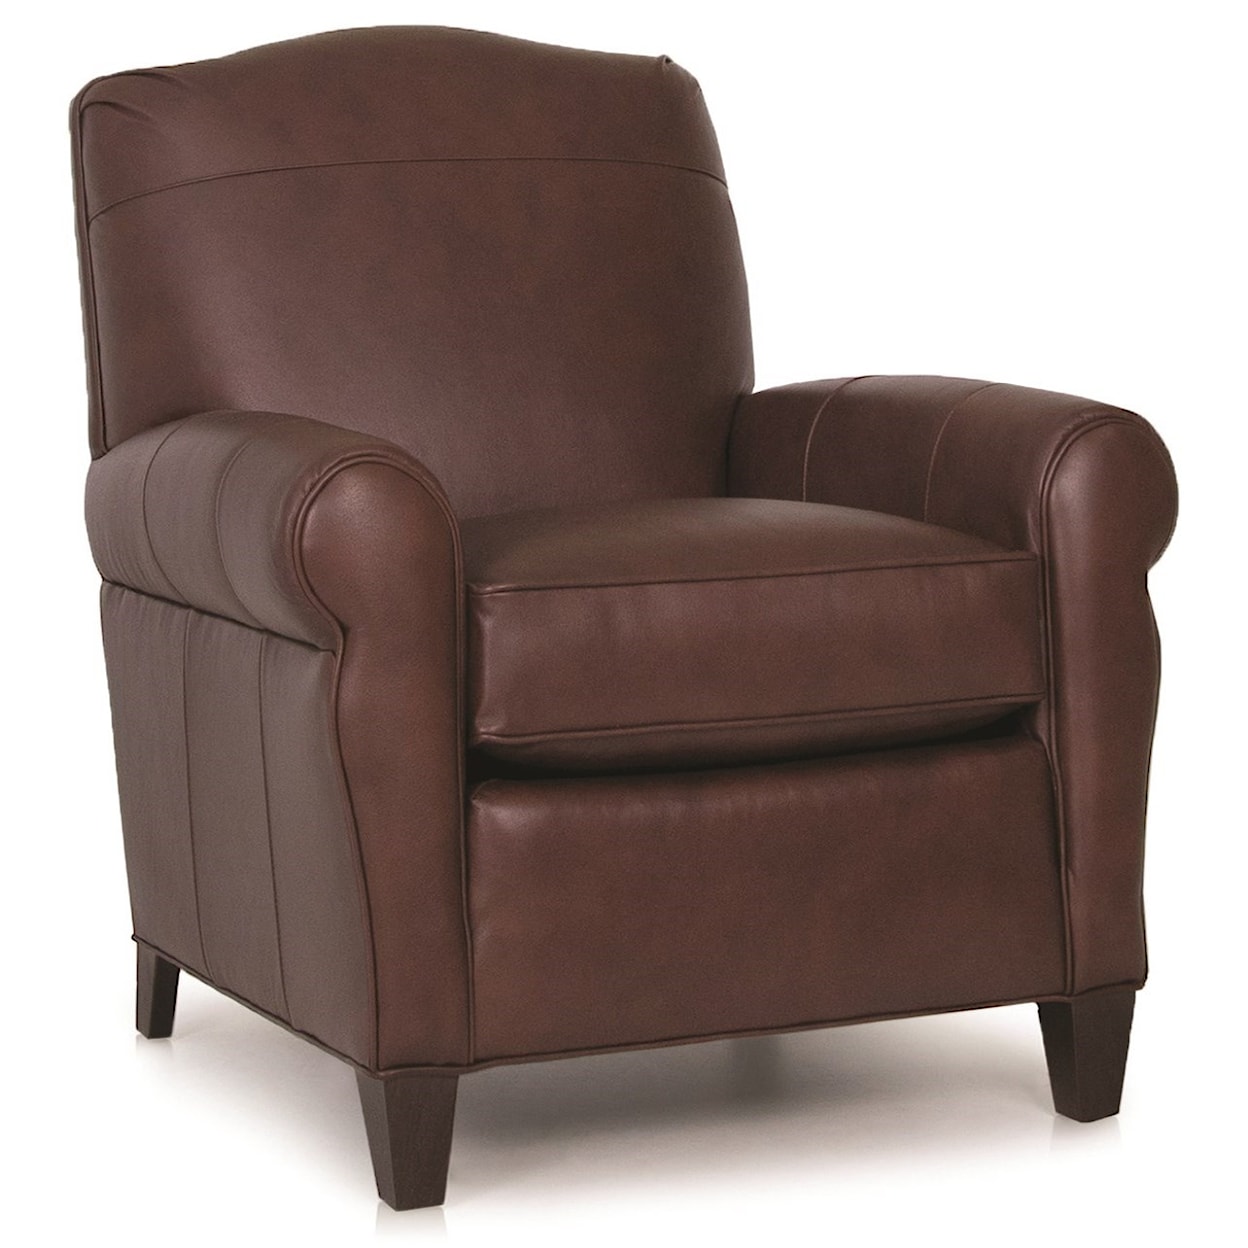 Smith Brothers Smith Brothers Upholstered Chair